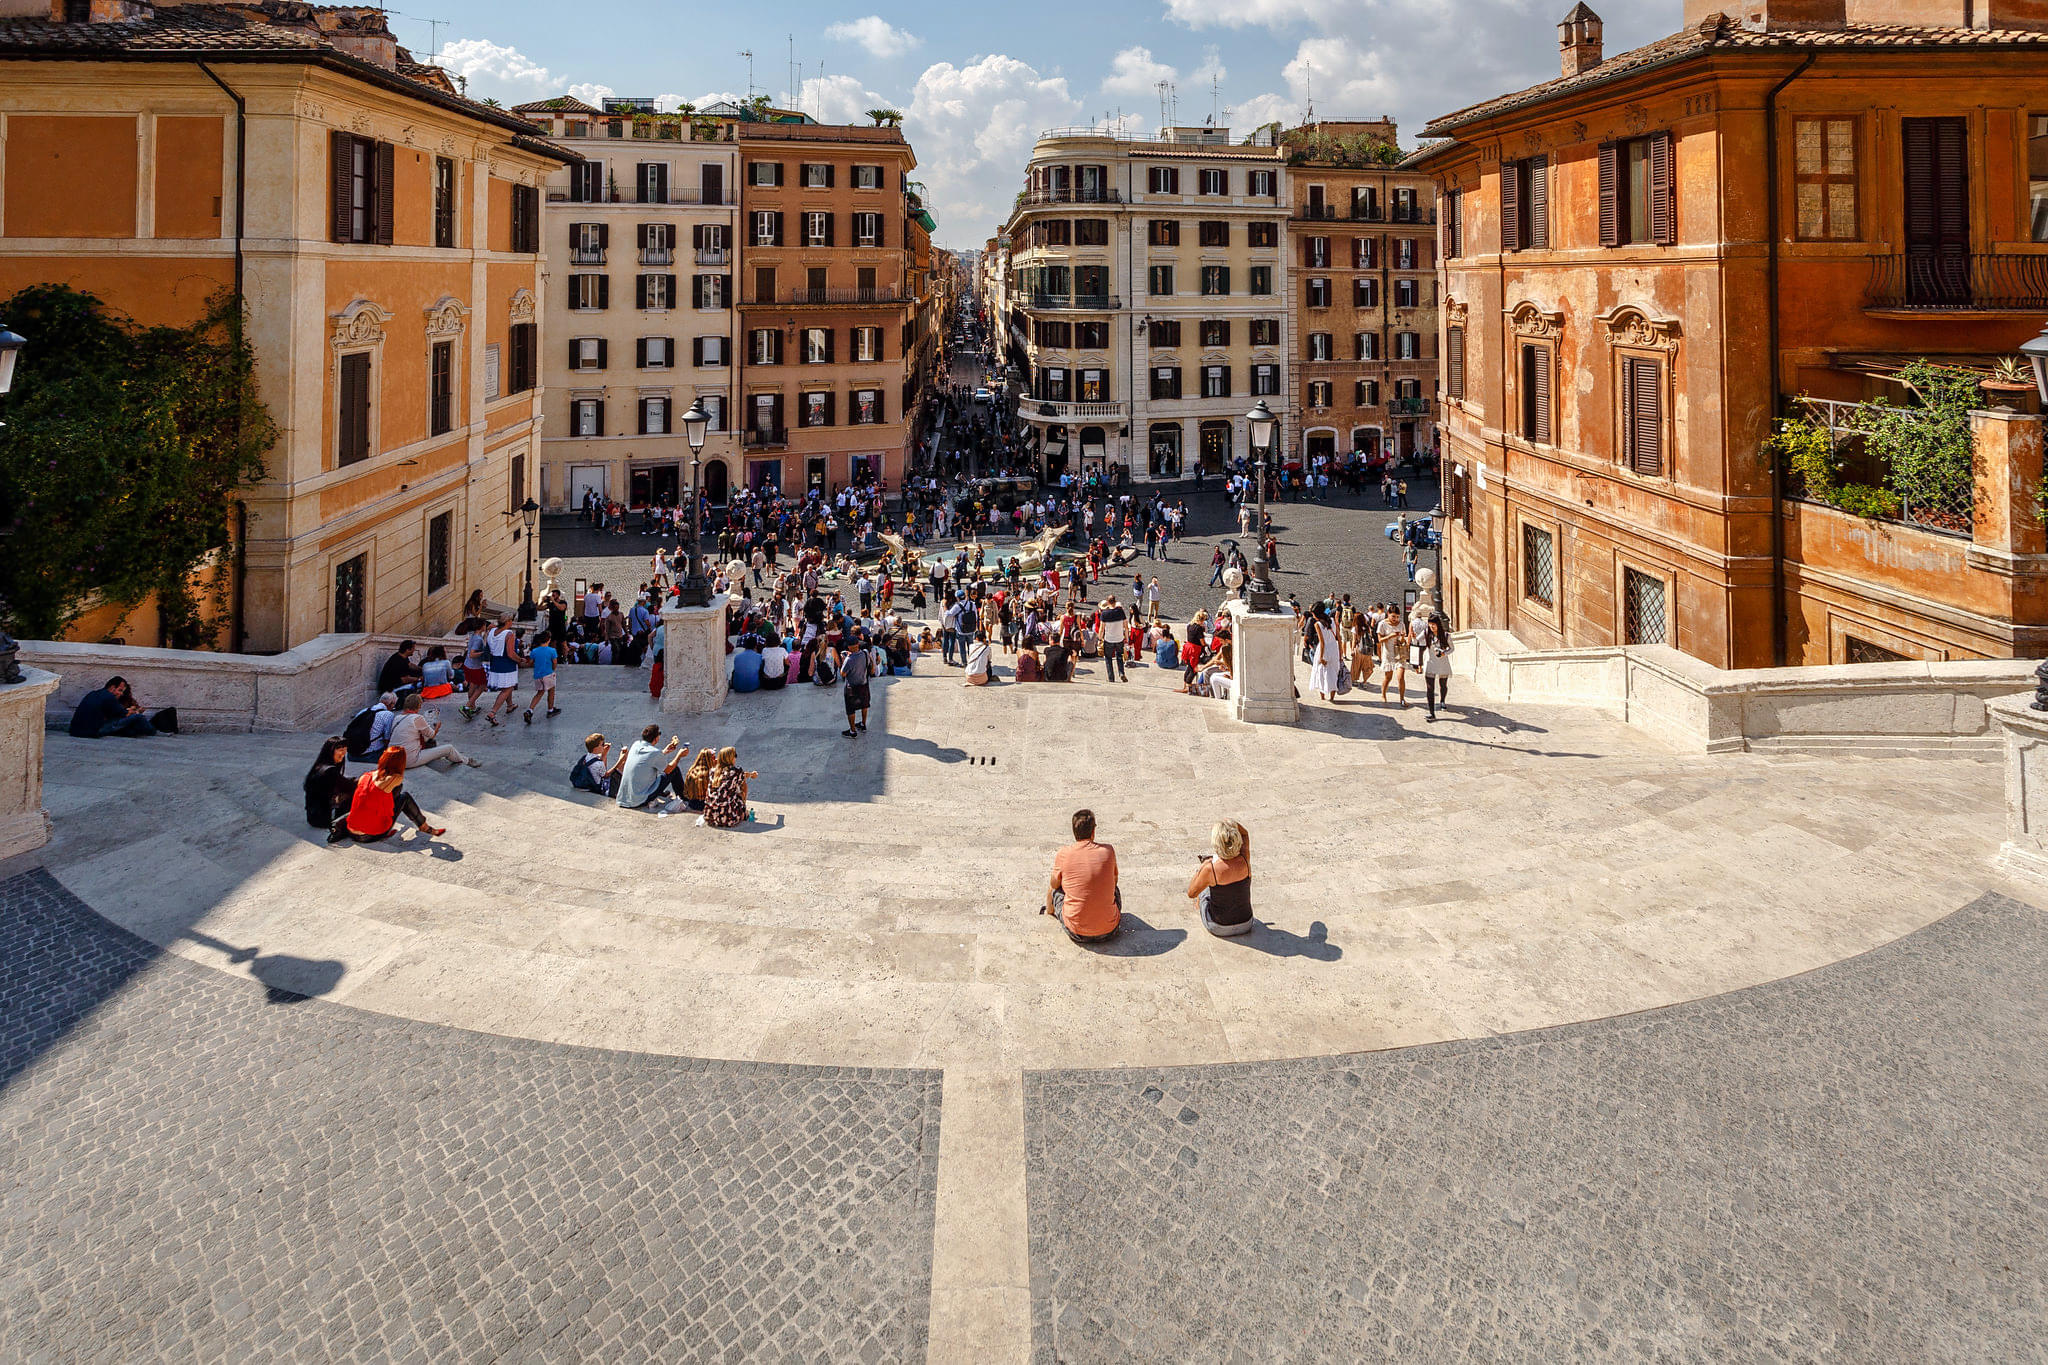 Spanish Steps Overview